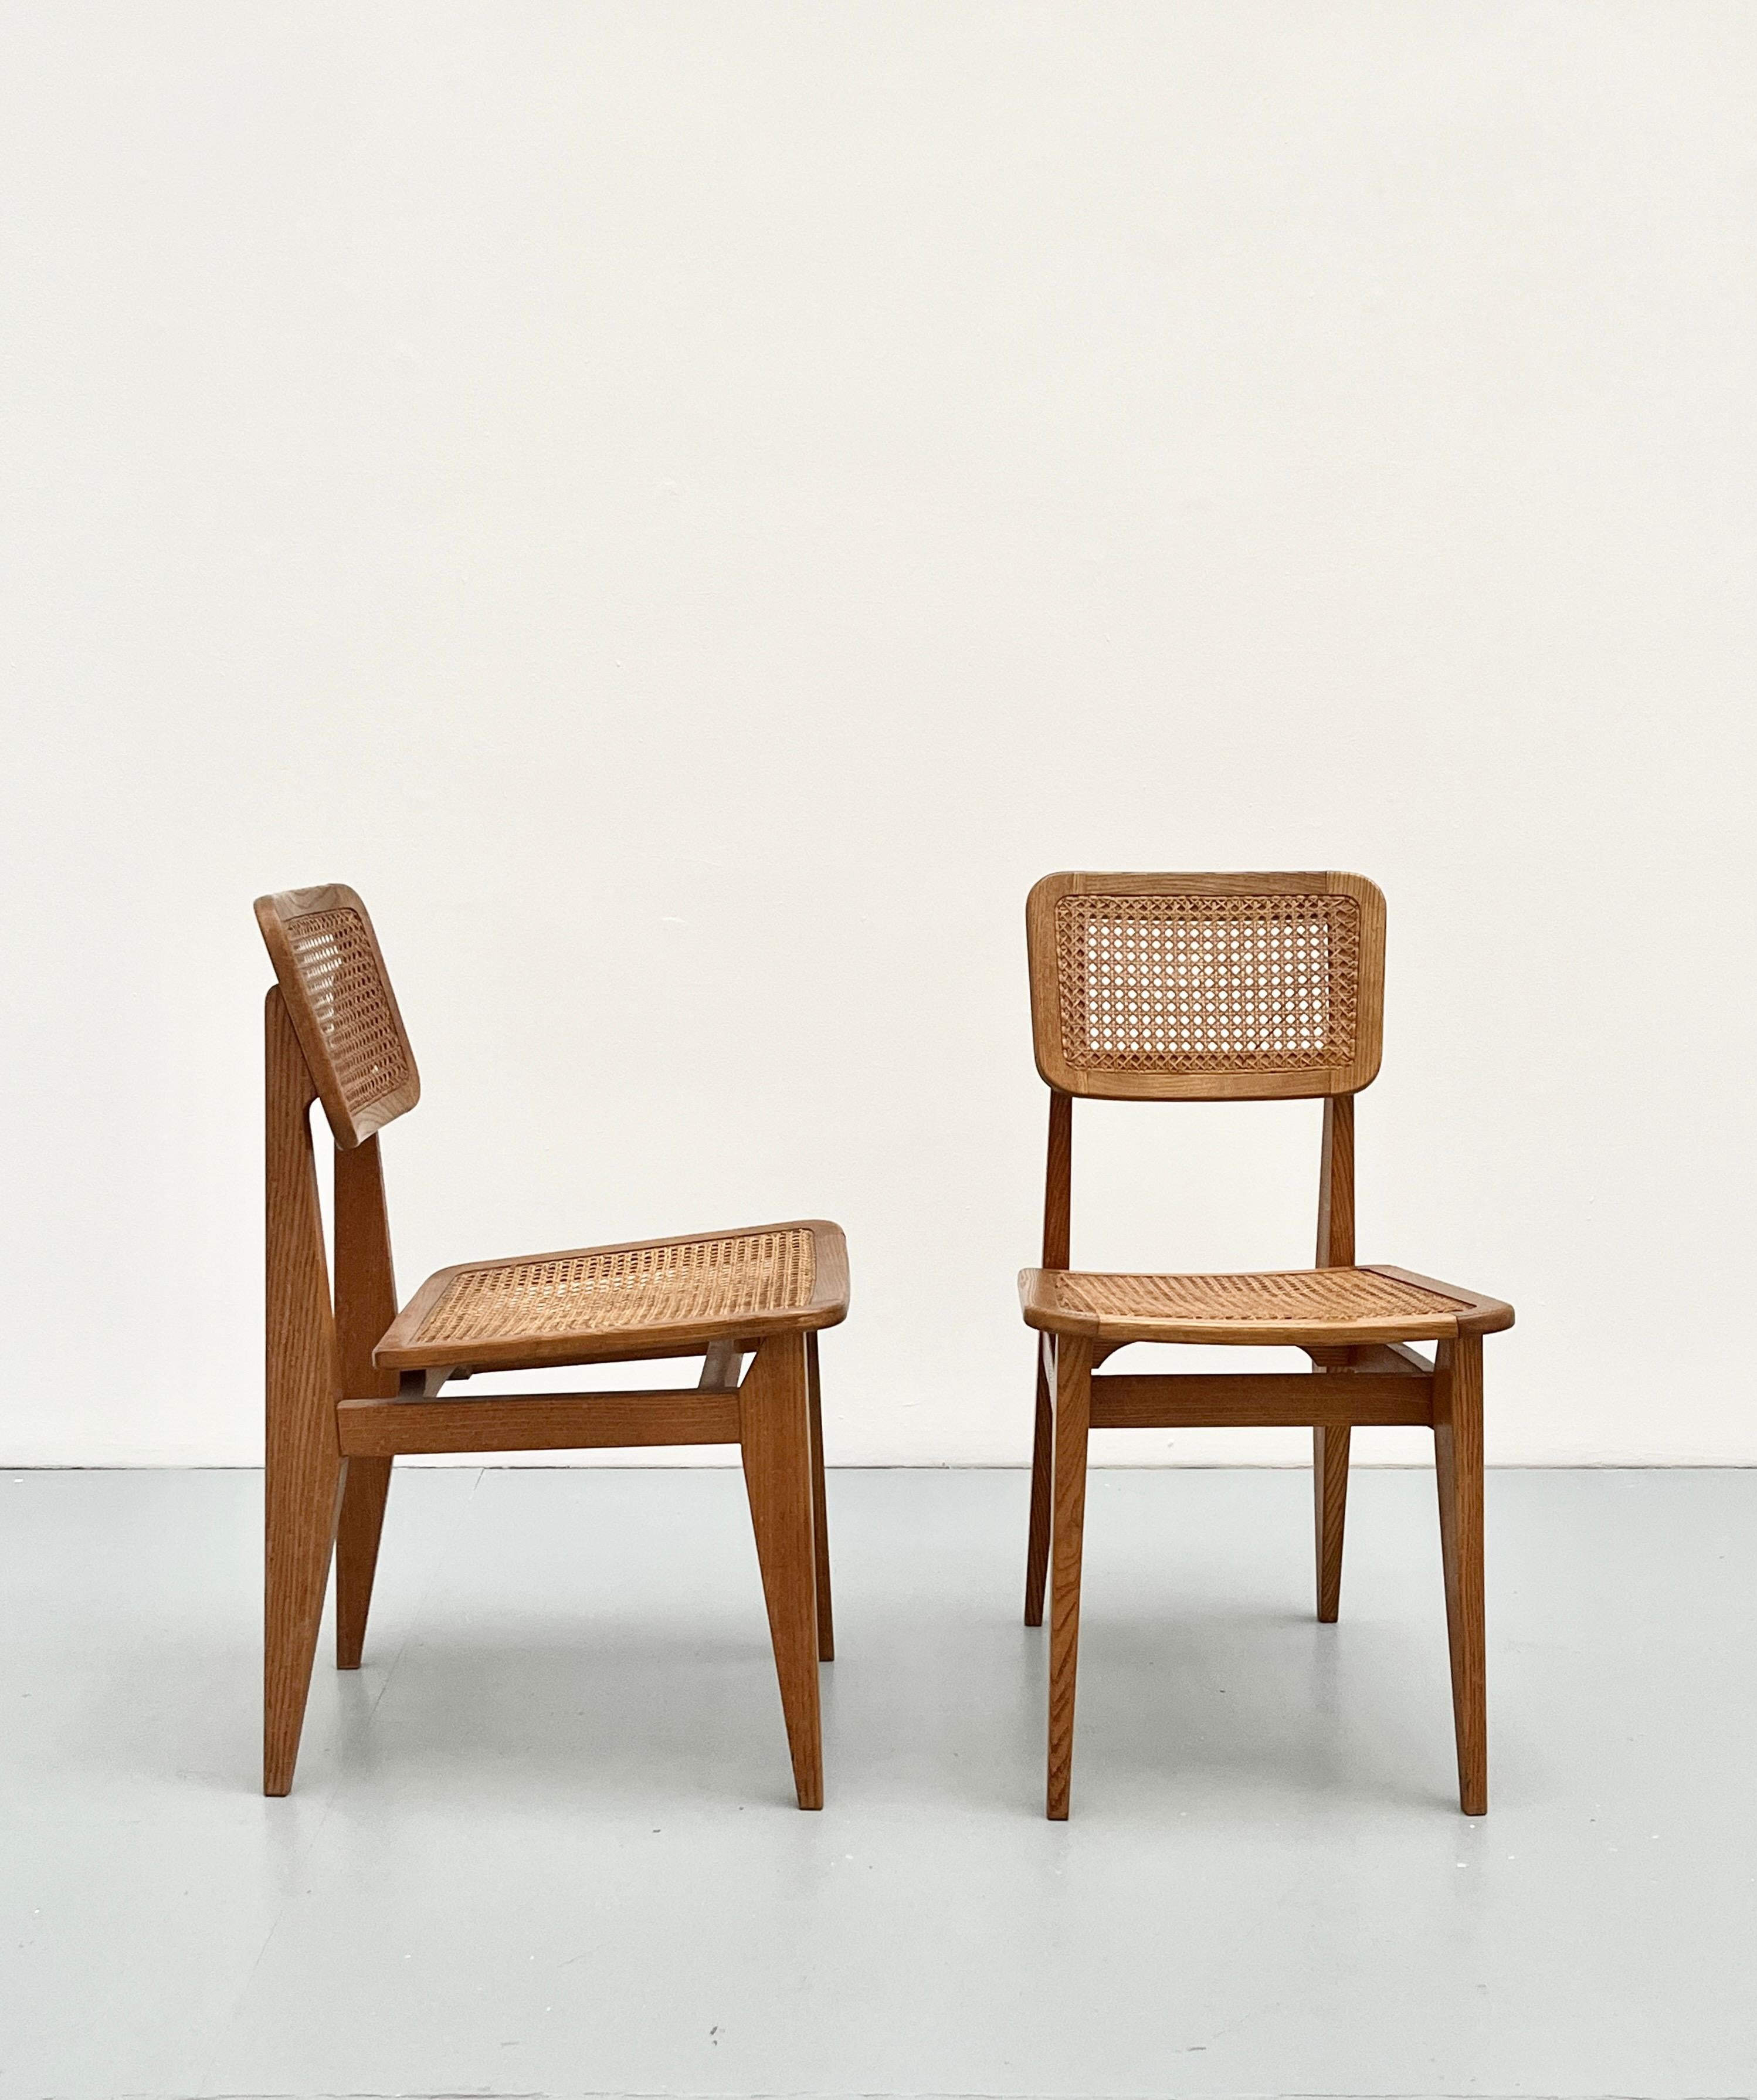 French Pair of C chairs by Marcel Gascoin, ARHEC edition, 1947 For Sale